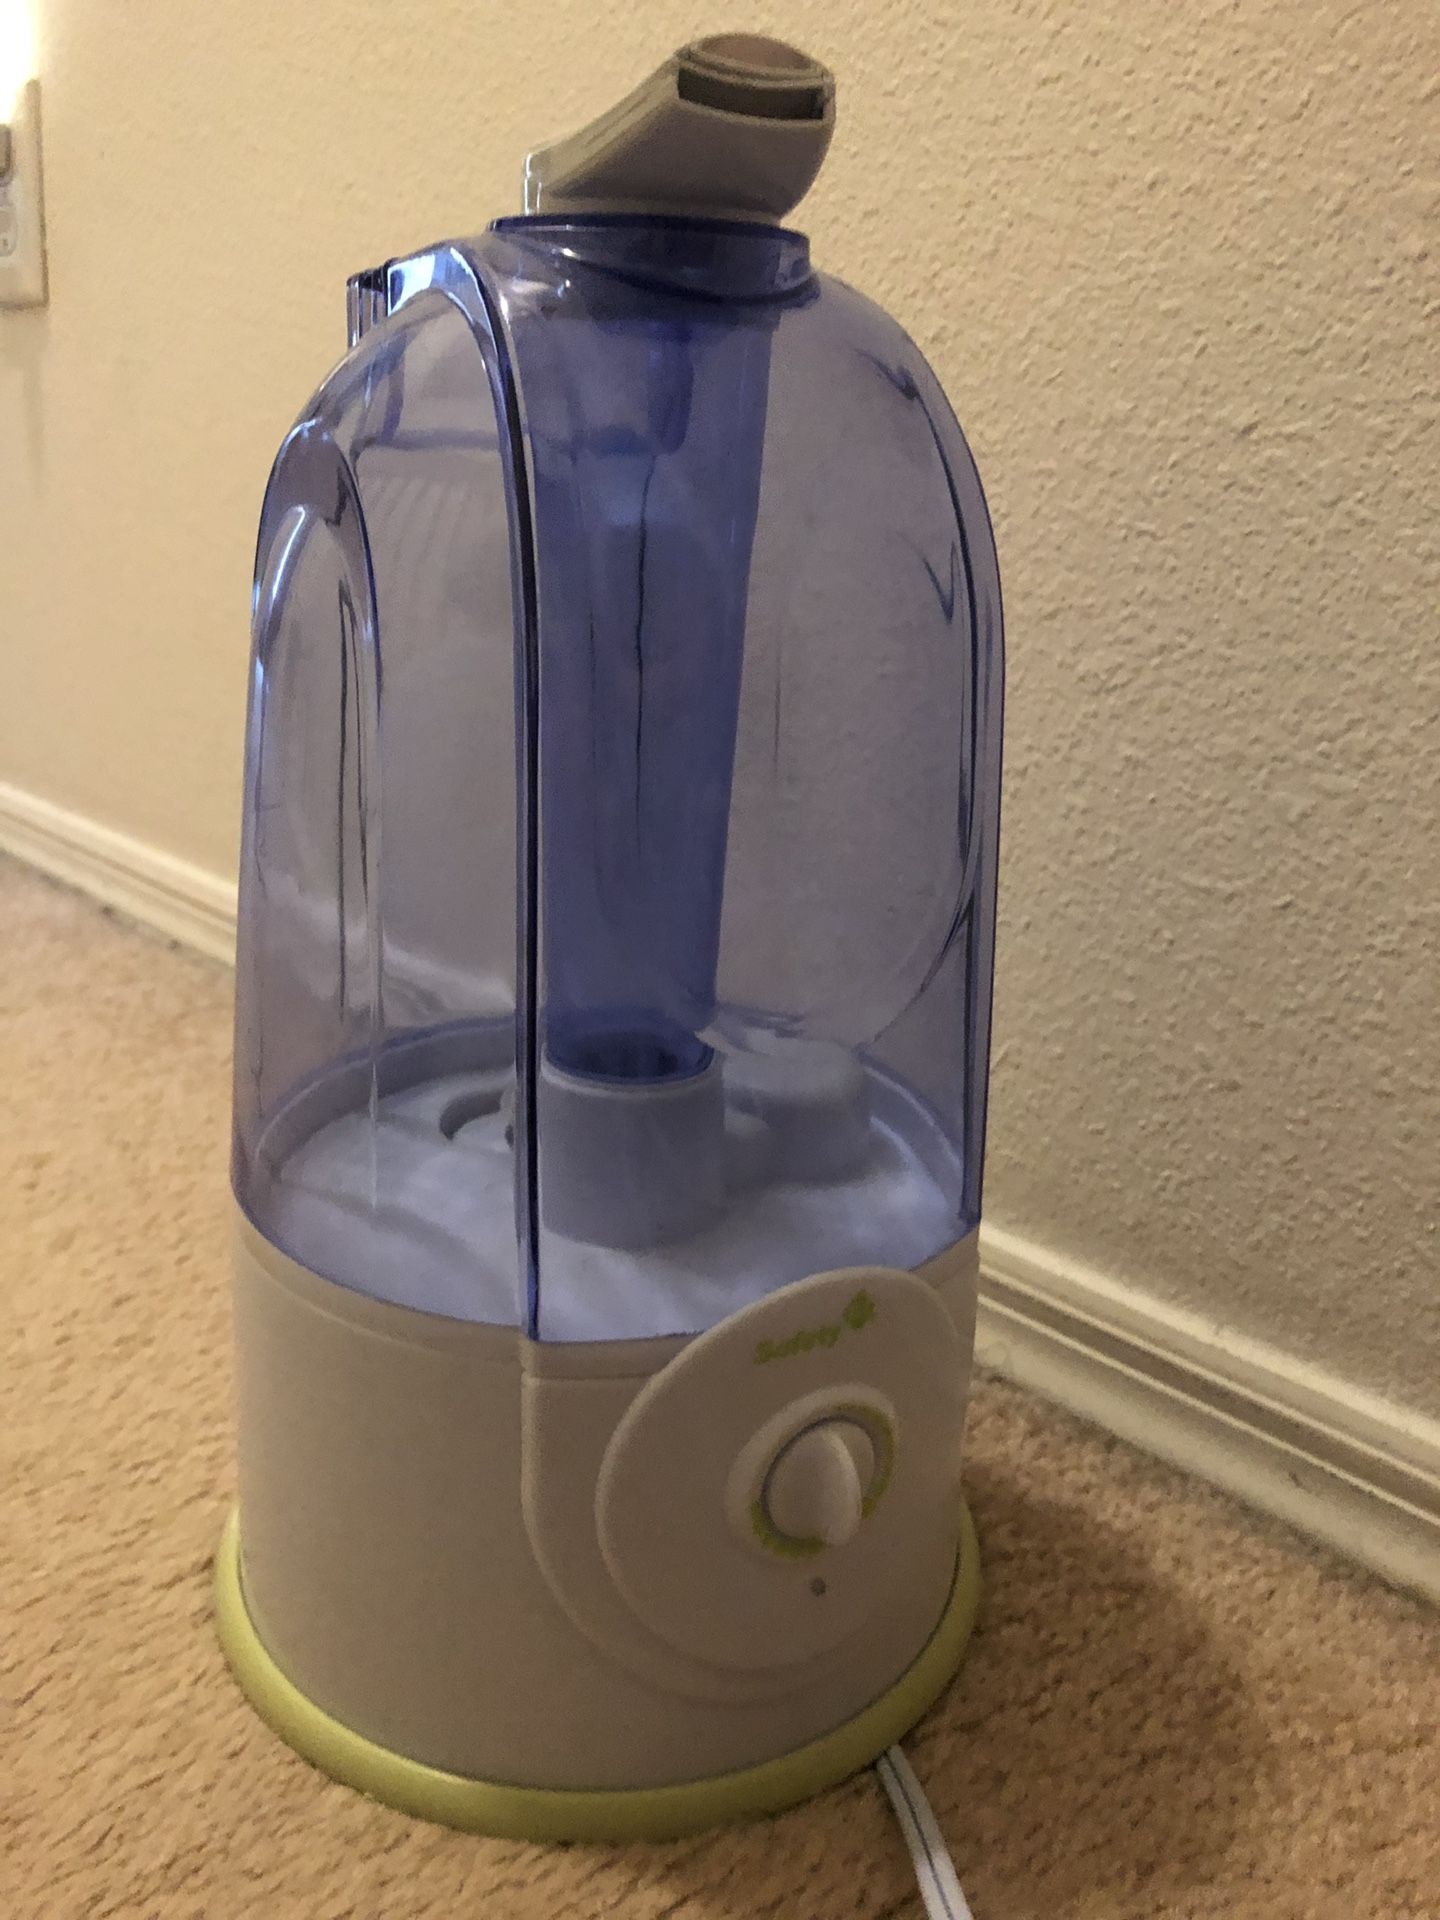 Safety 1st humidifier